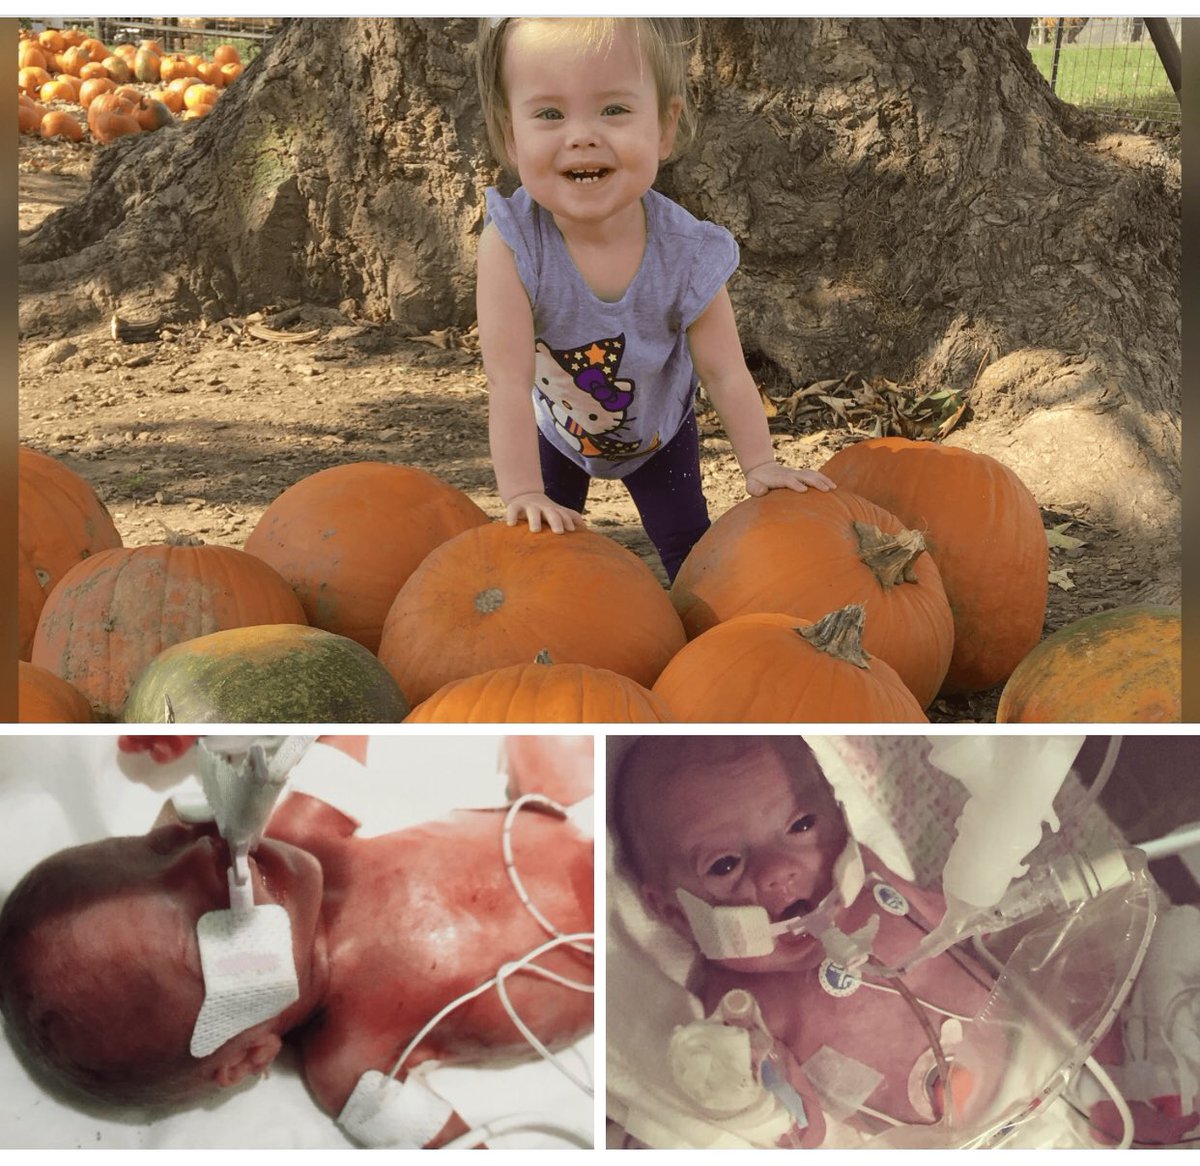 Baby Willow was born at 22 weeks and 5 days. Now she’s 4 years old.  h/t  @DSiPaint  https://flutter.nationwidechildrens.org/willow-born-at-22-weeks/